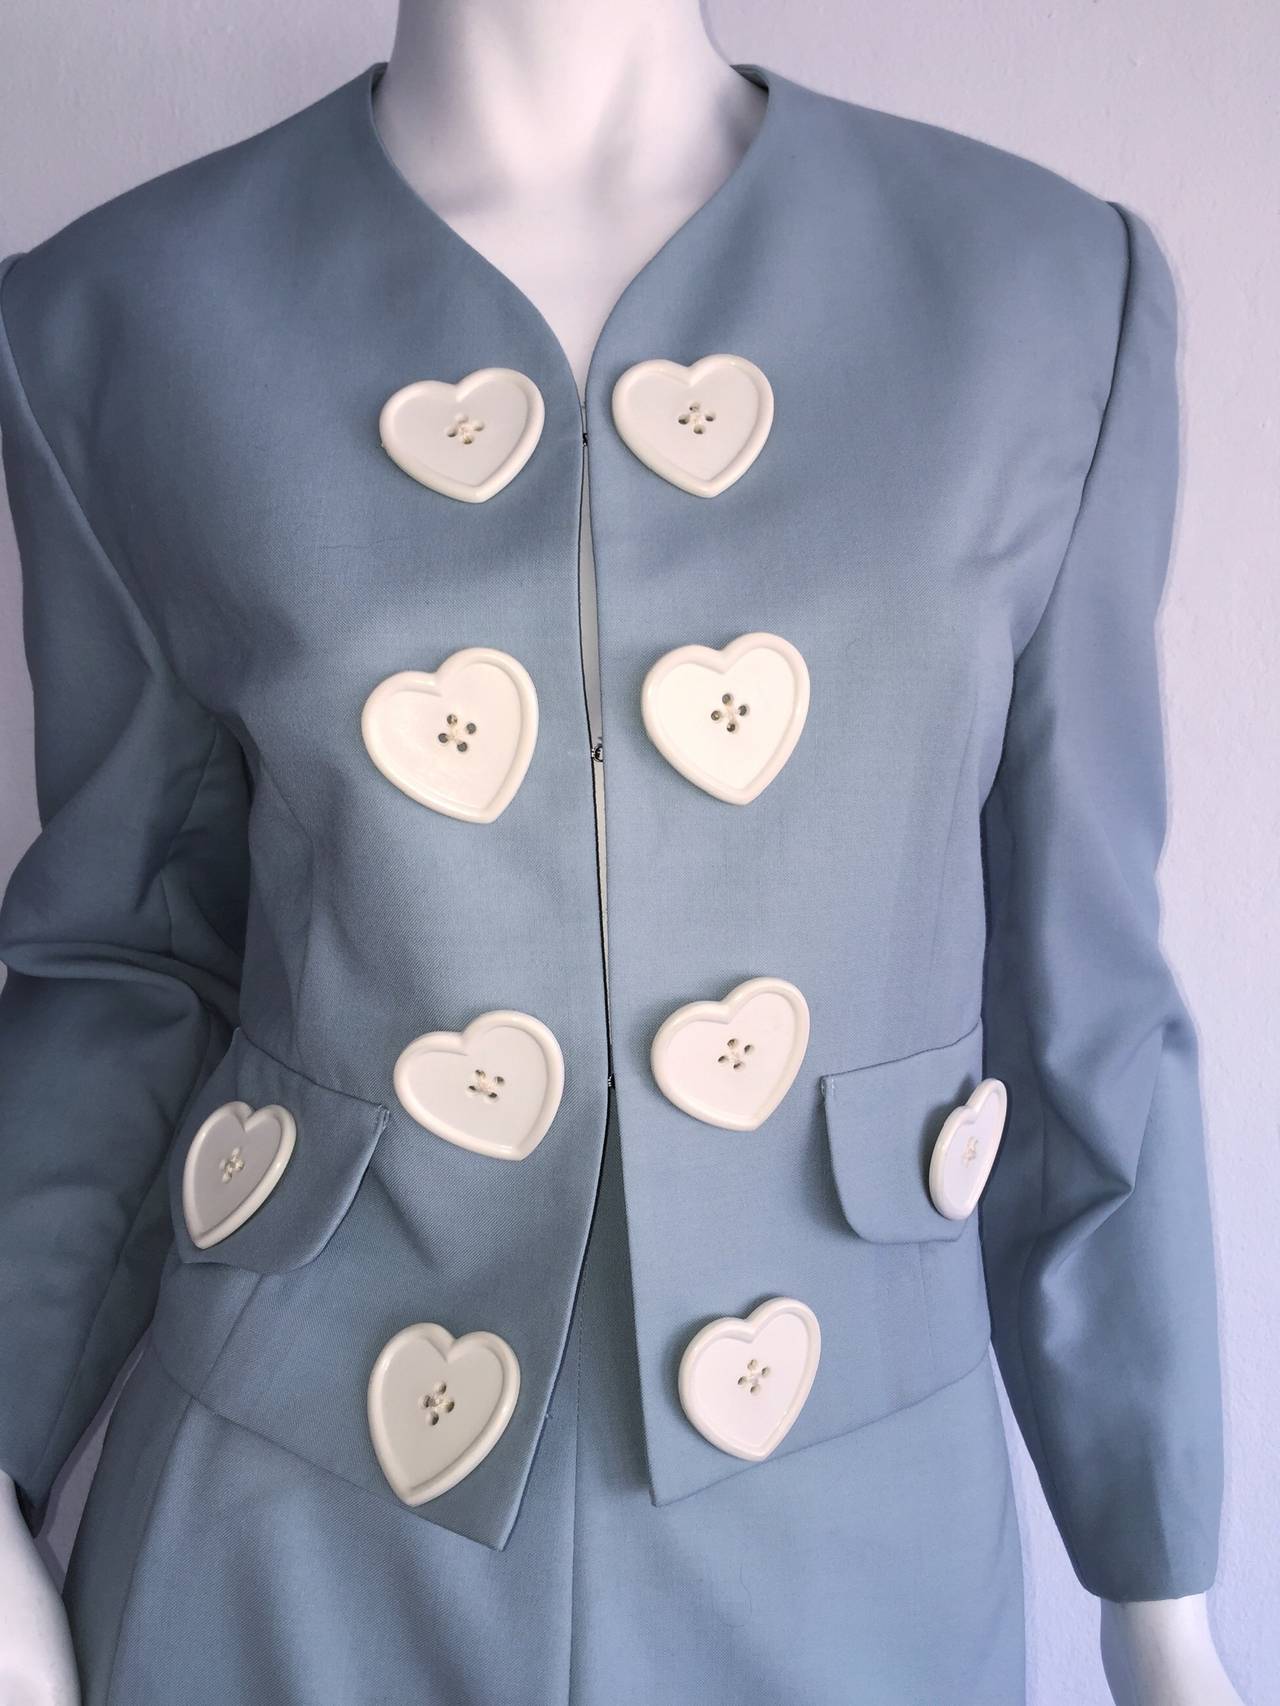 Absolutely Amazing vintage Moschino Cheap & Chic light blue skirt suit! Features white hearts up the front of the jacket, with hook-and-eye closures up the bodice. High waisted pencil skirt. Super lightweight fabric makes great for Spring or Summer!